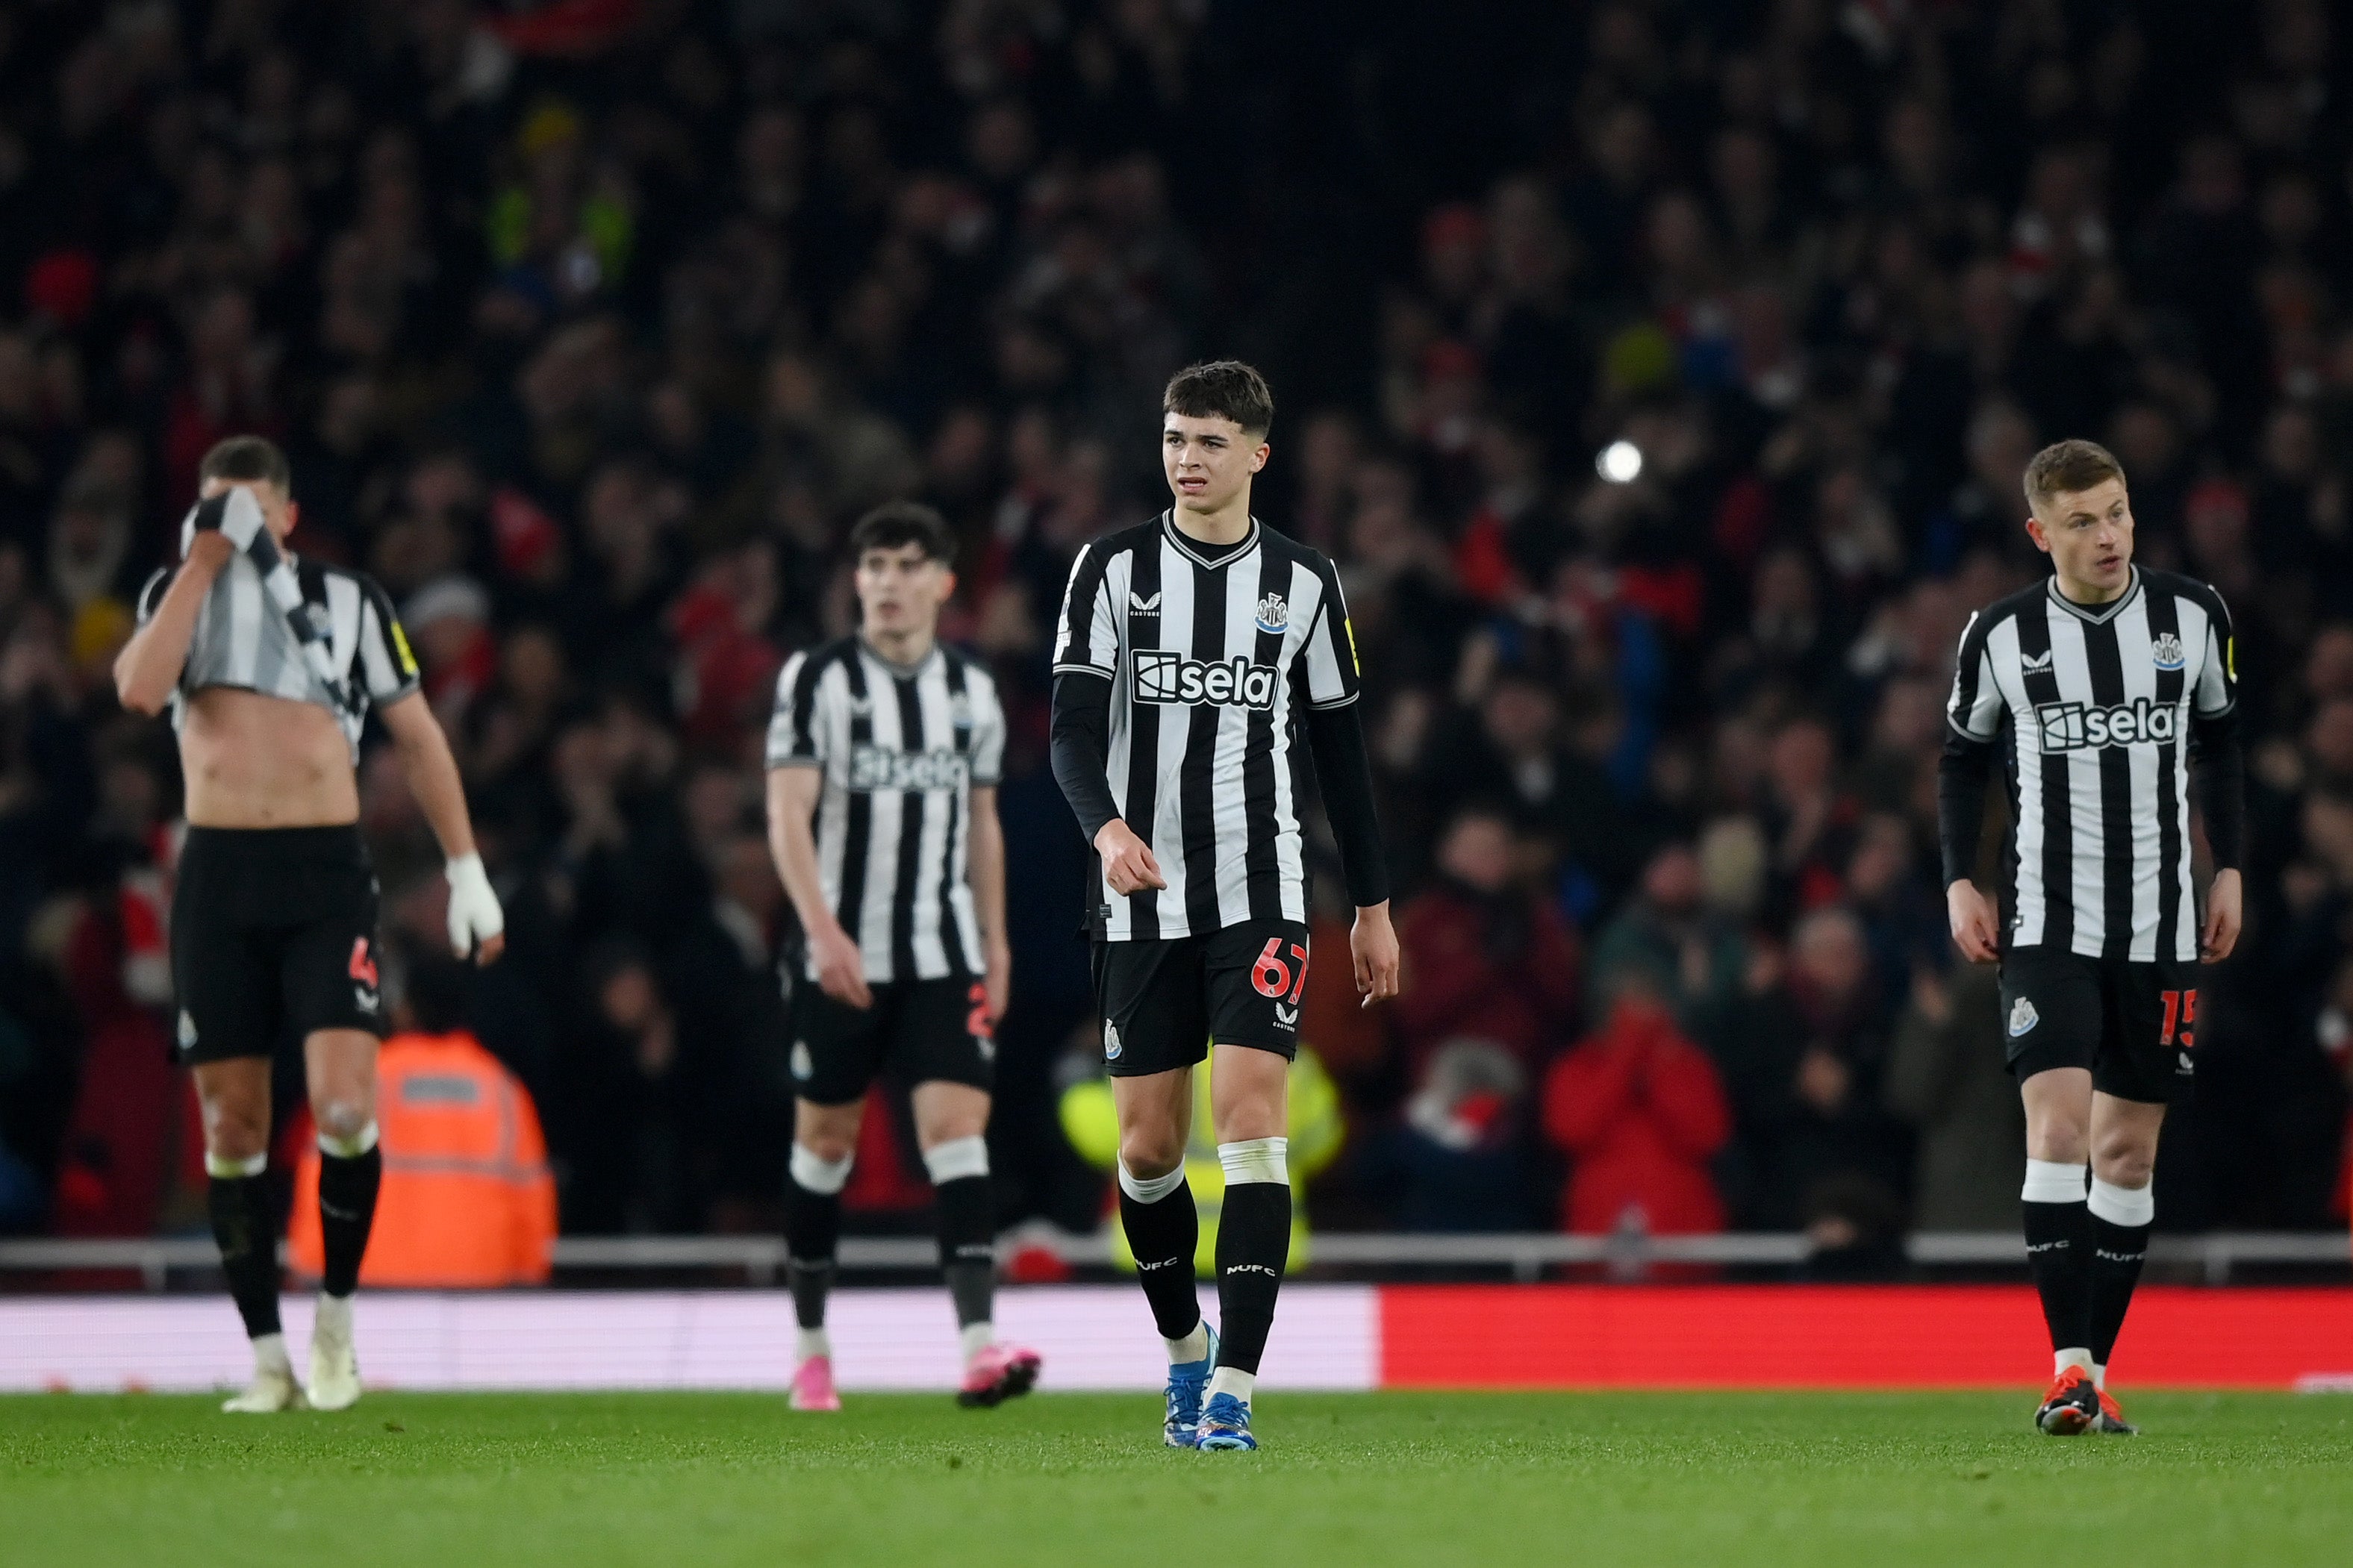 Newcastle were thrashed at the Emirates